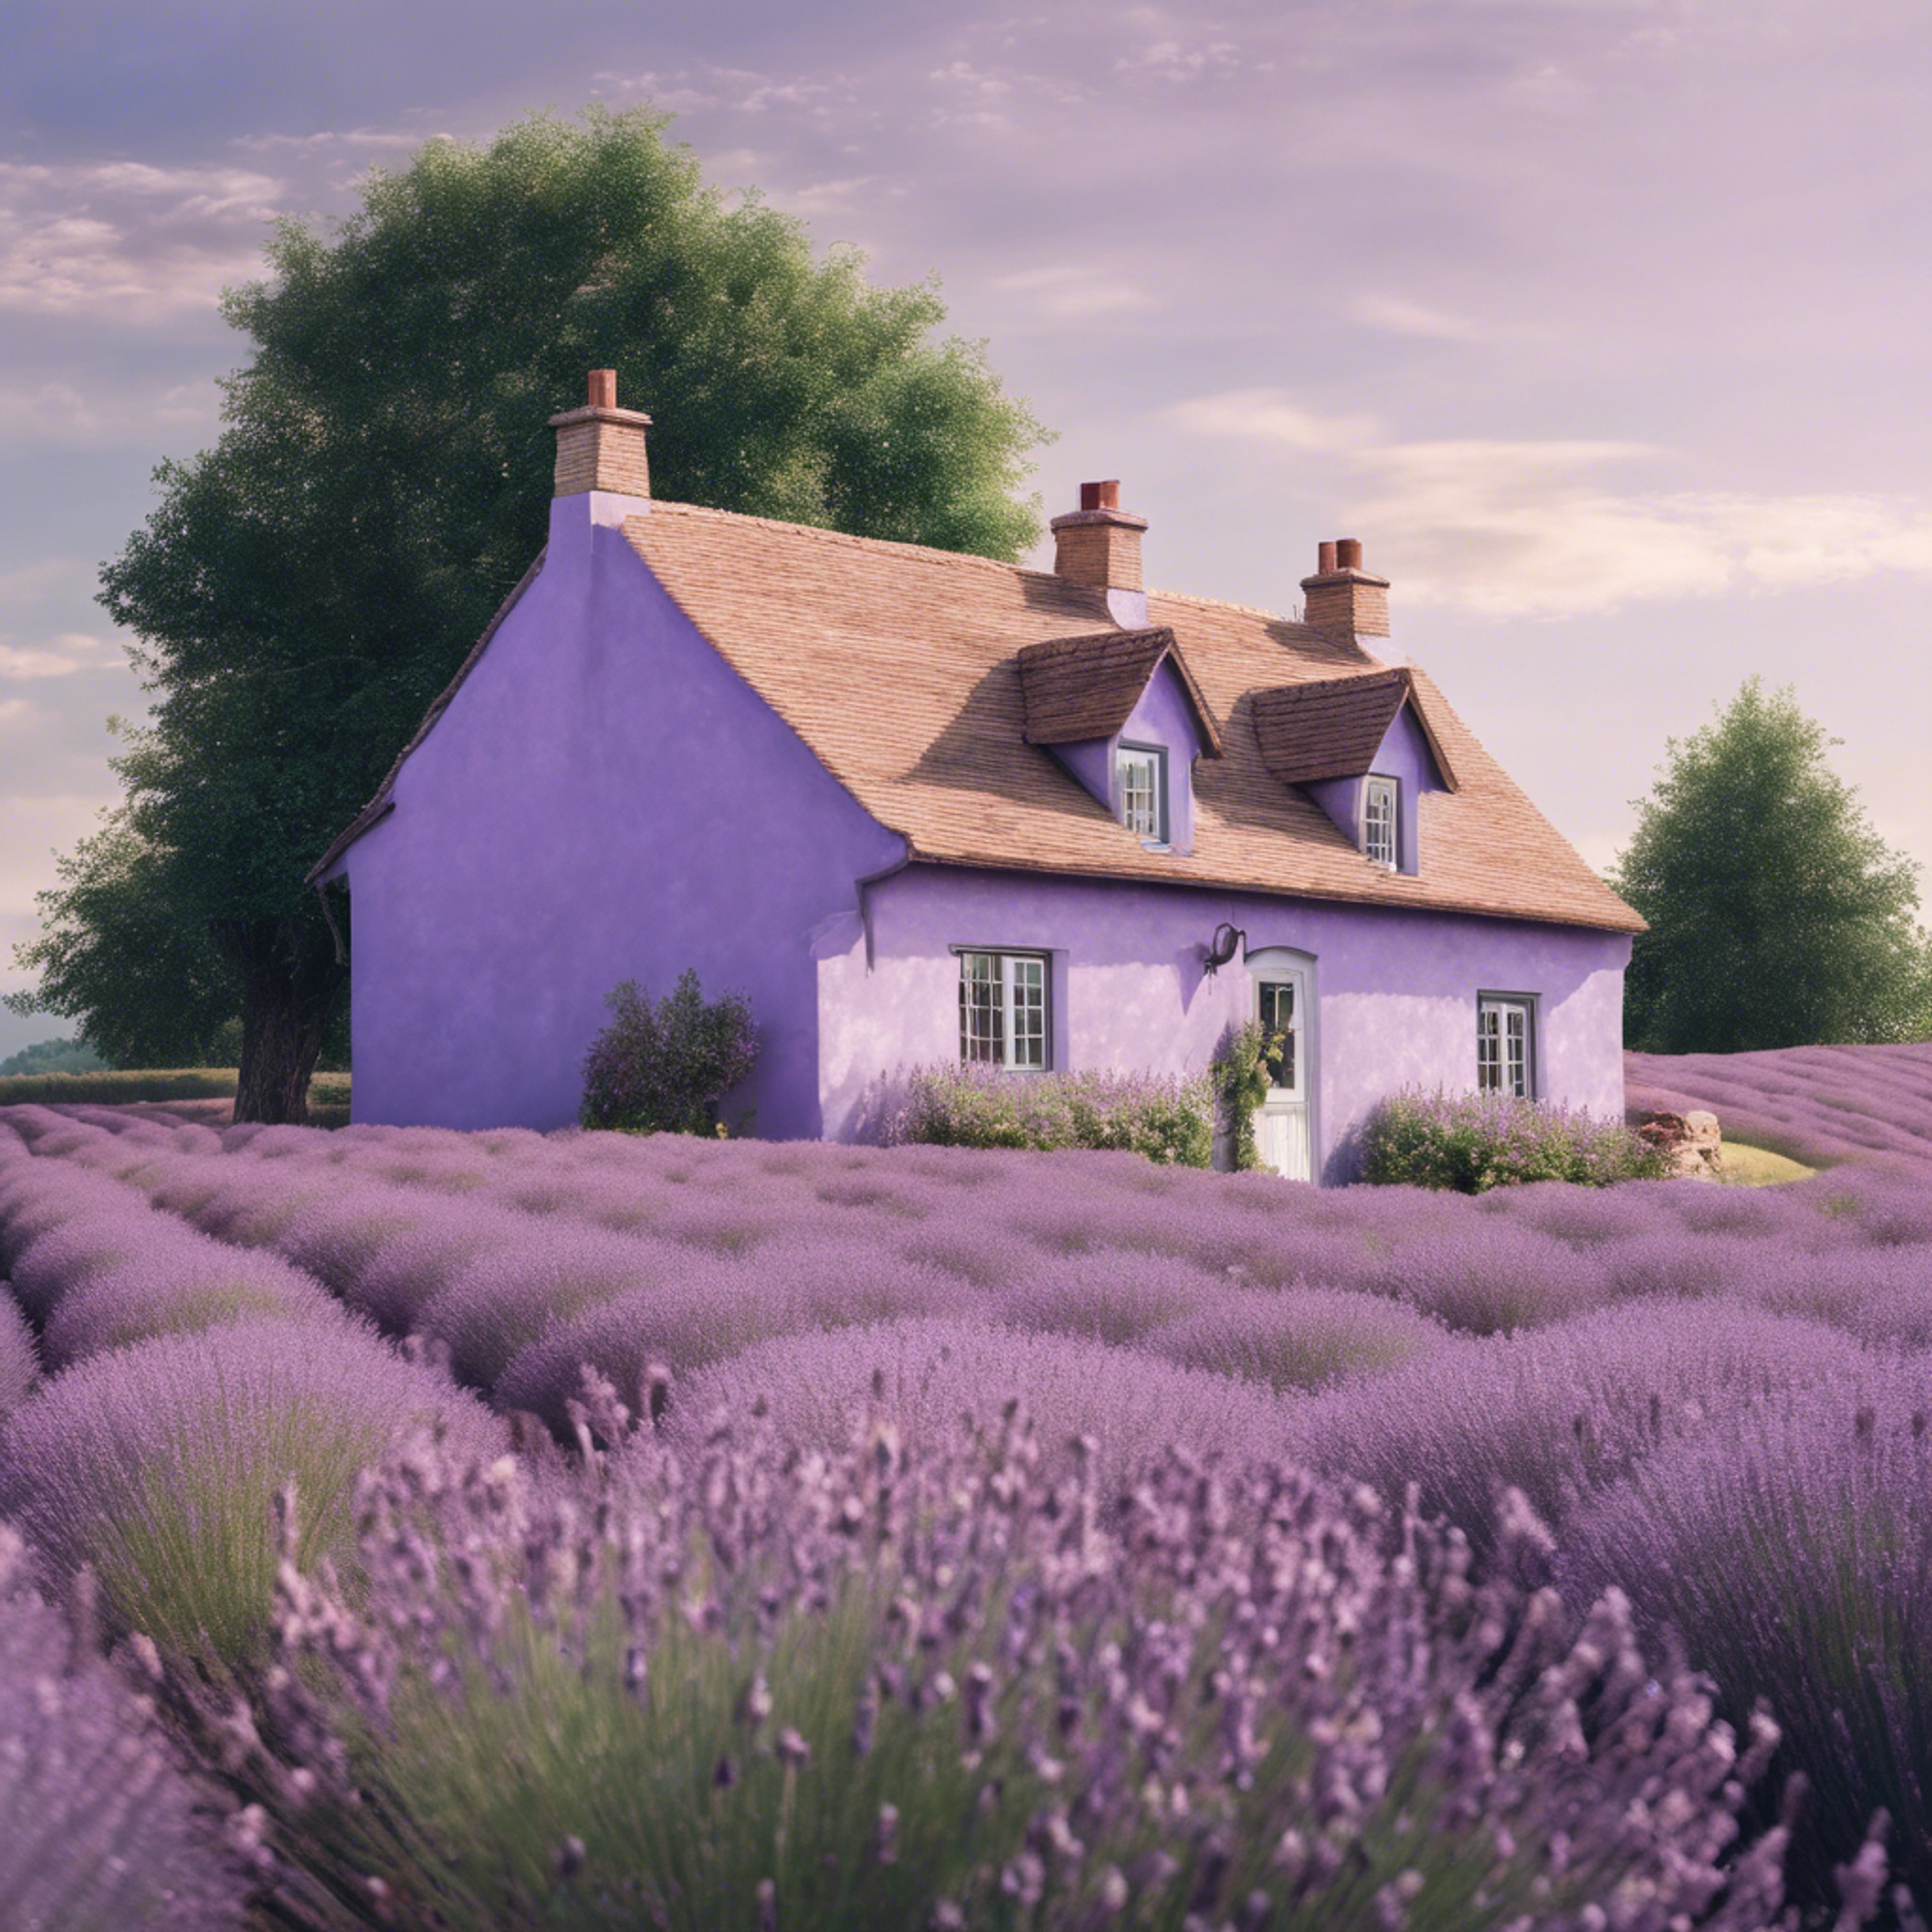 A quaint pastel purple cottage in the countryside surrounded by lavender fields. Tapeta na zeď[9ff1532238764d01813b]